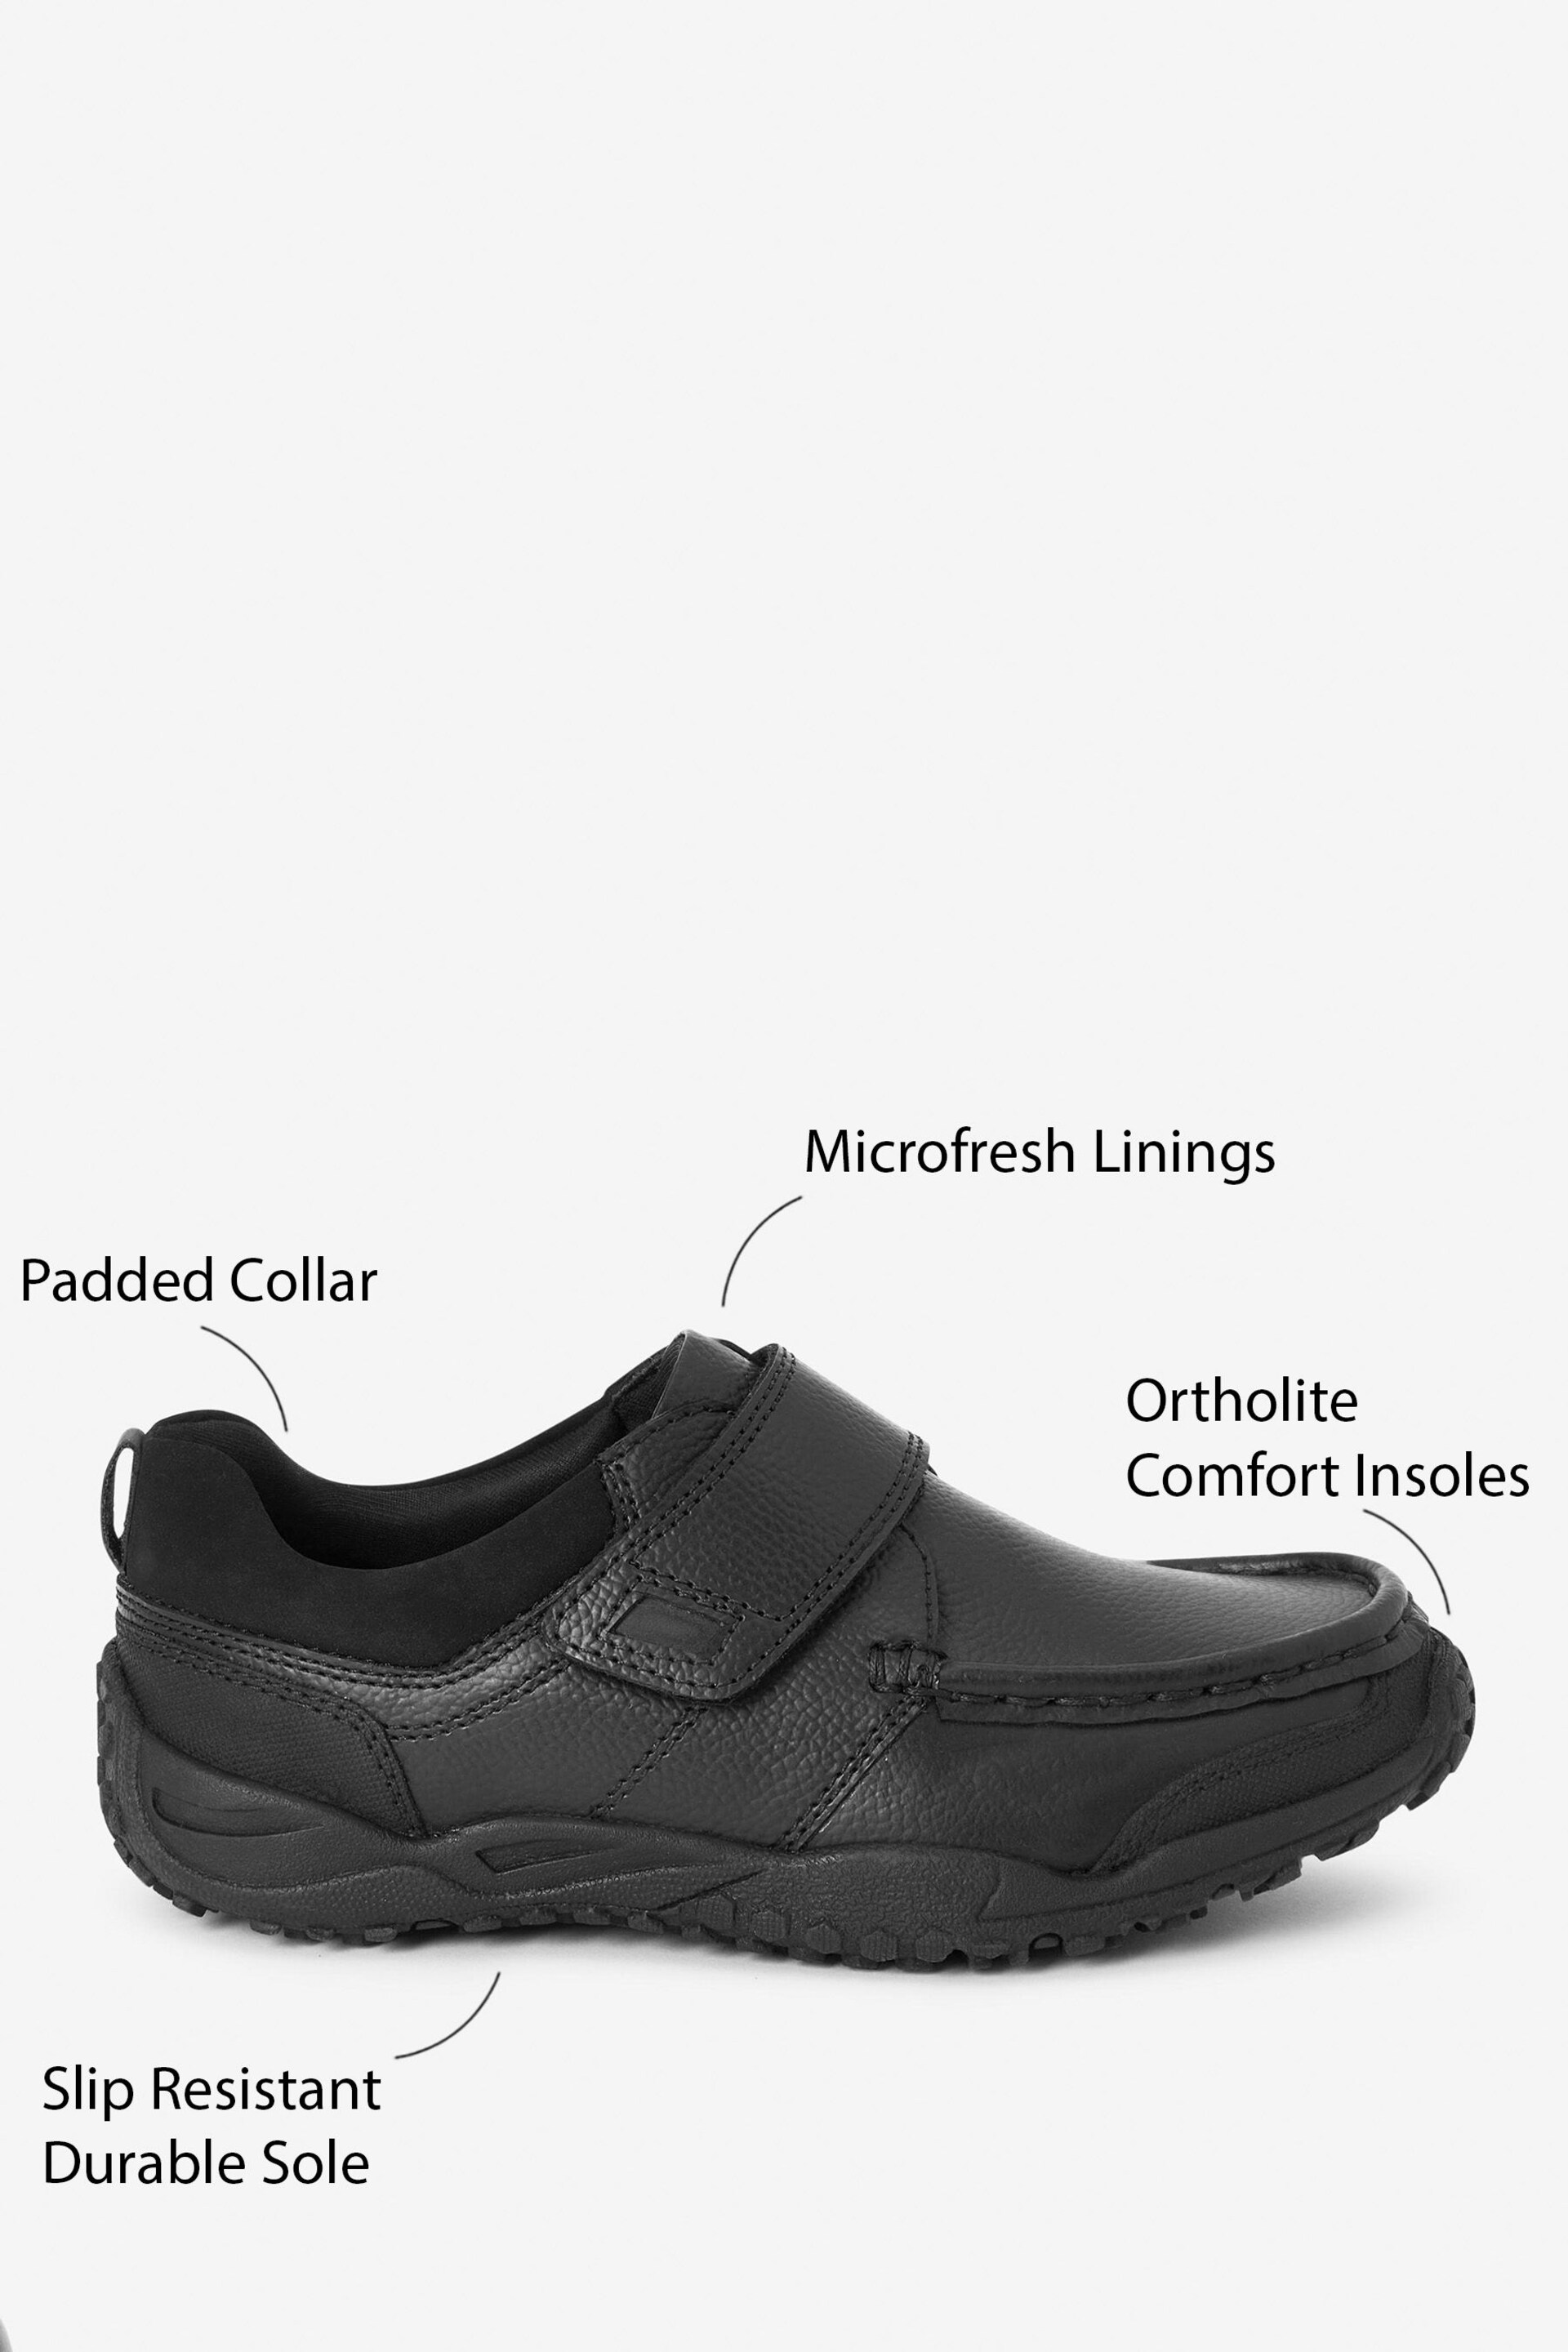 Black Standard Fit (F) School Leather Single Strap Shoes - Image 10 of 10